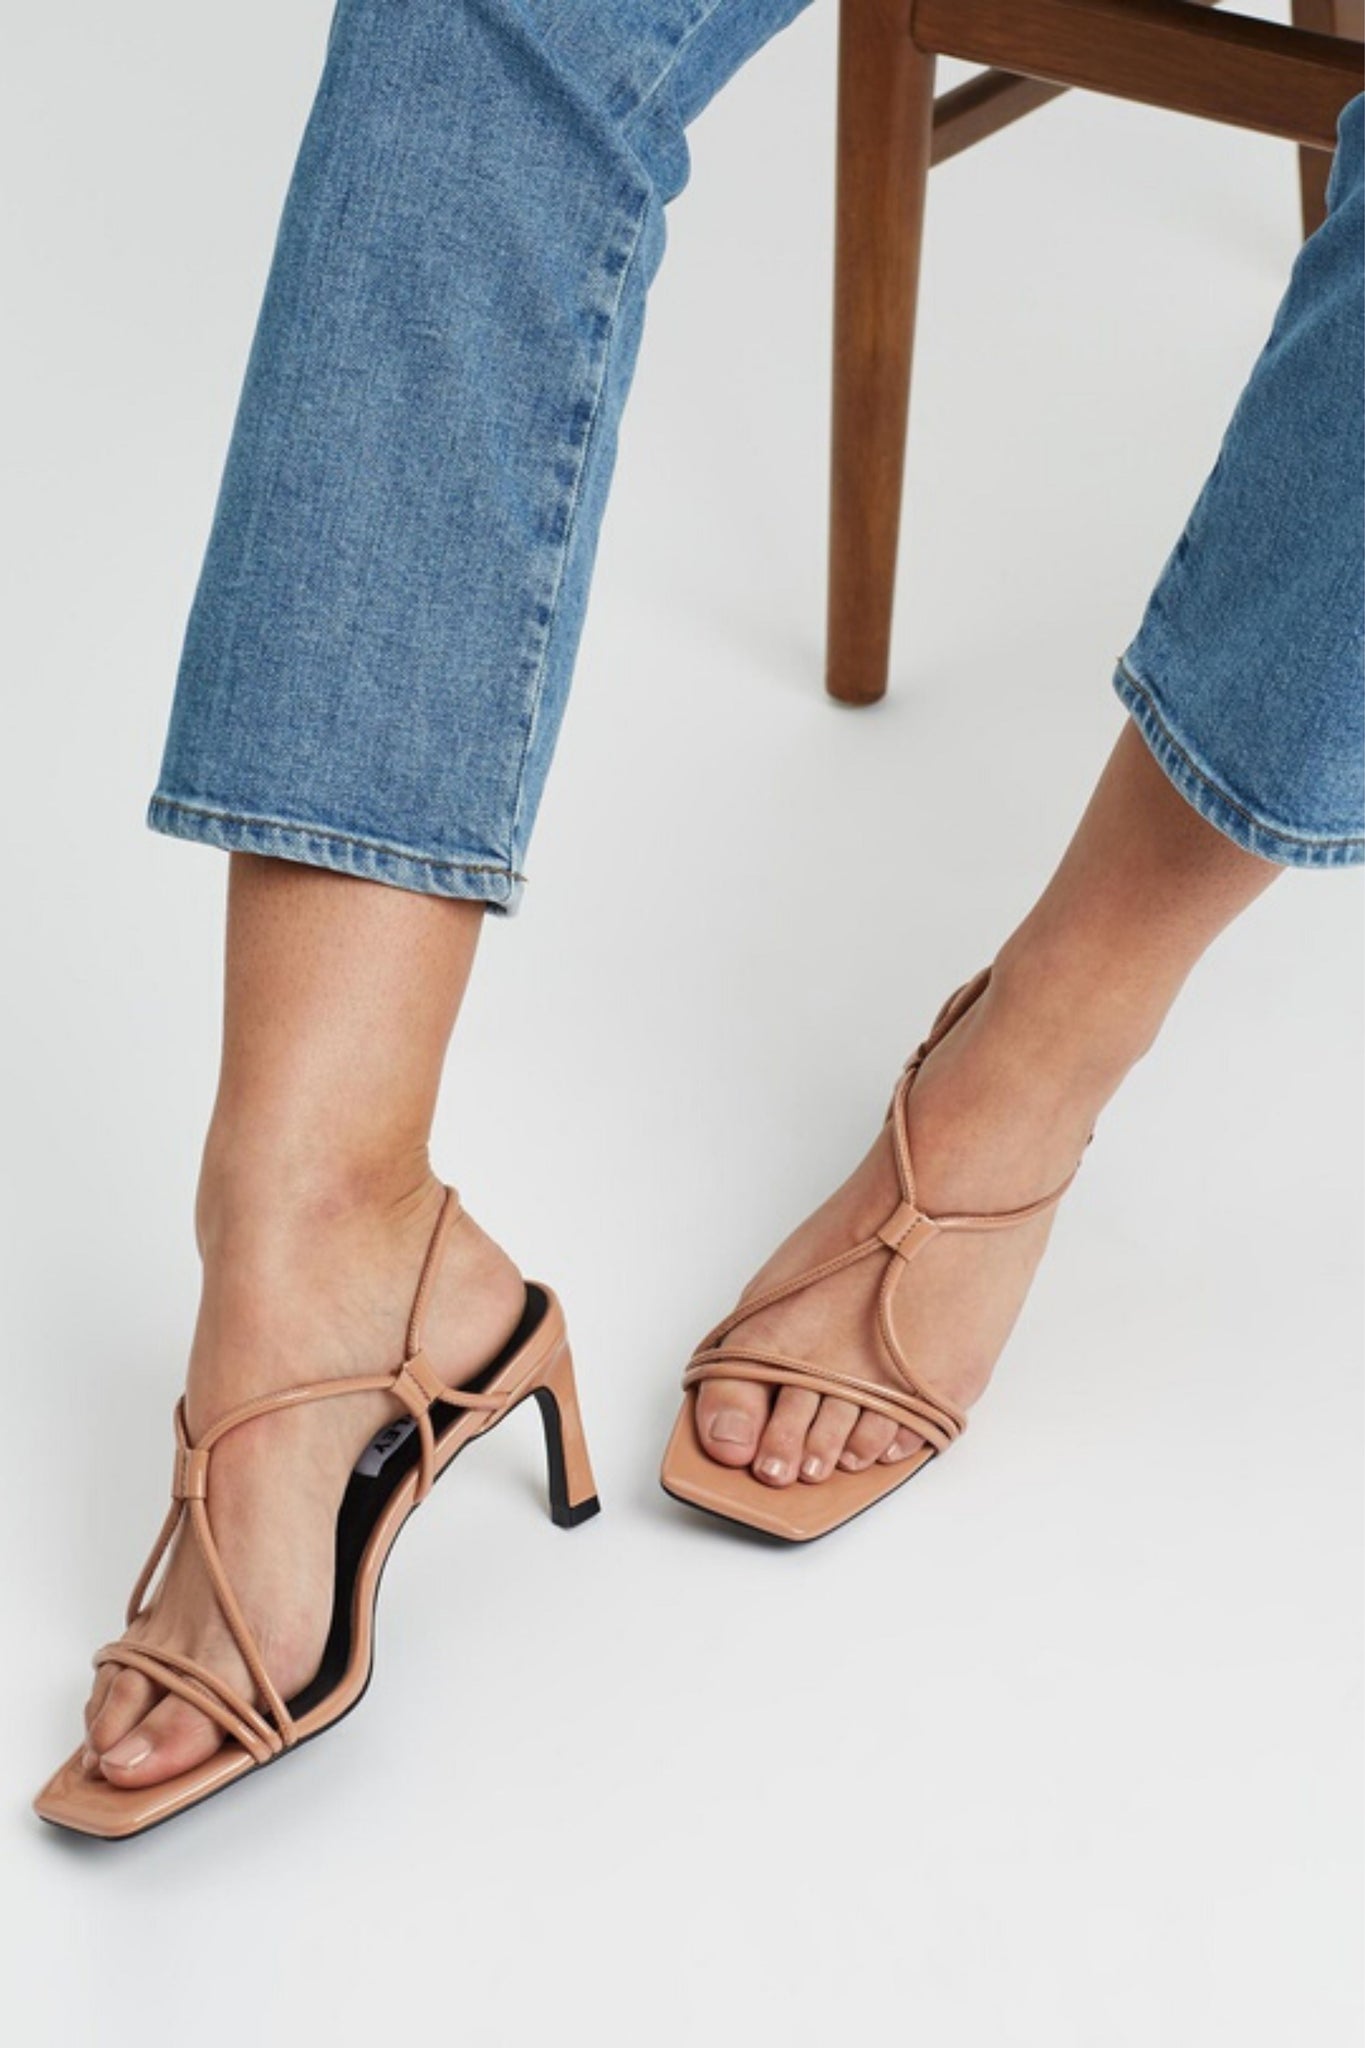 Buy Caverley Val Heel in Tan Gloss online now at Smoke and Mirrors Boutique. Shop Caverley Shoes with ZipPay and AfterPay. Caverley Shoes online stockists Australia. 